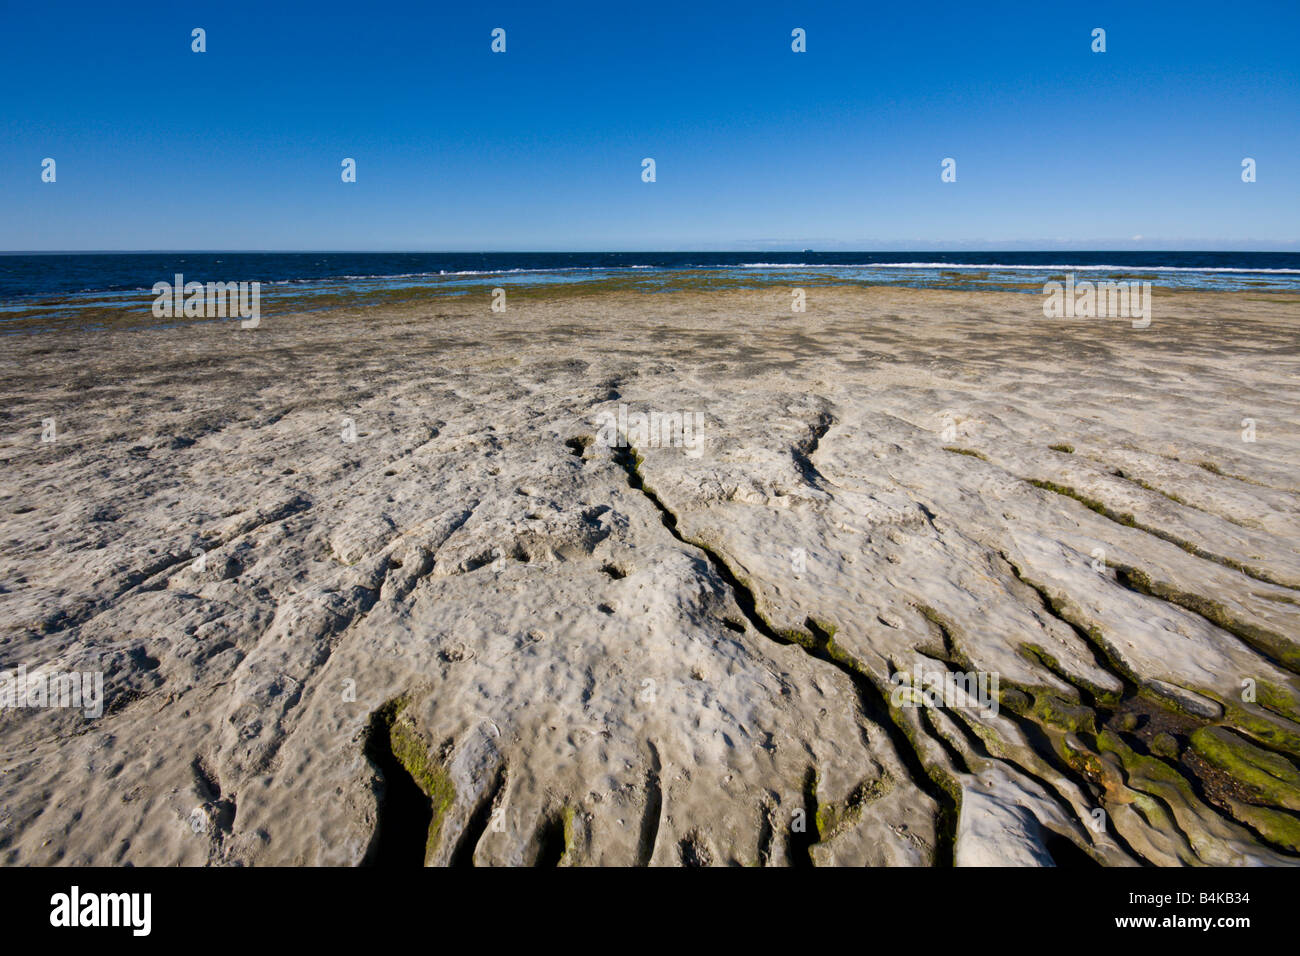 Low tide at Peninsula Valdes in whale season. Patagonia, Argentina. Stock Photo